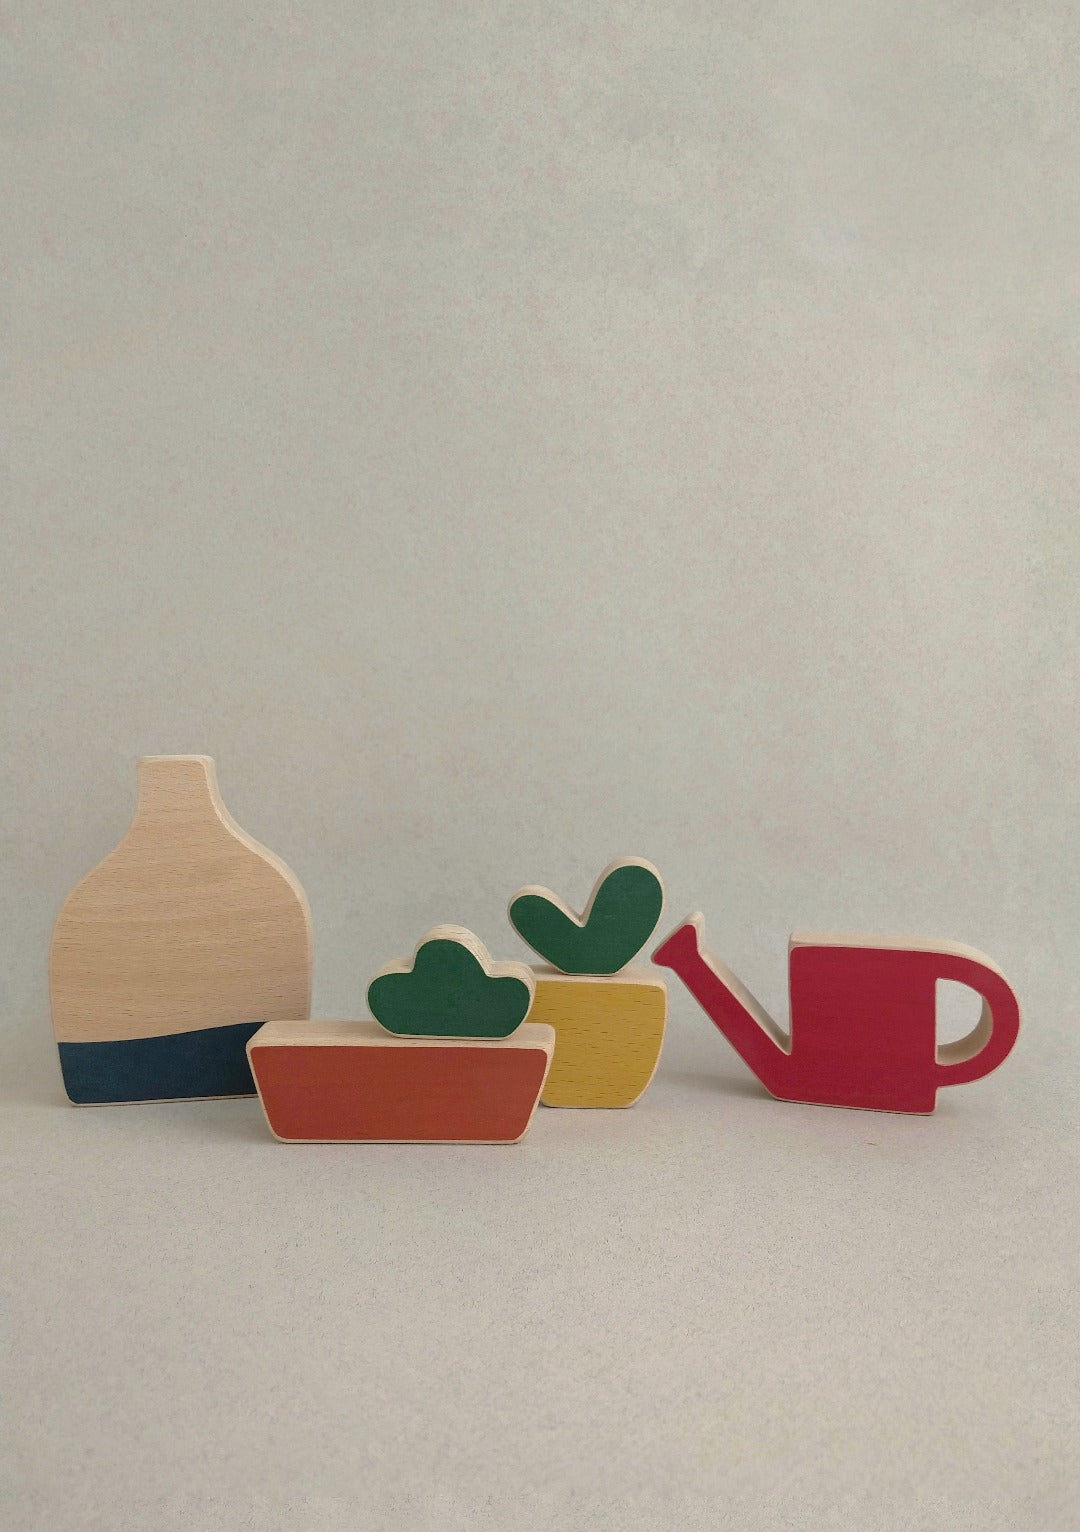 A beautifully designed wooden toy inspired by the world of illustration.